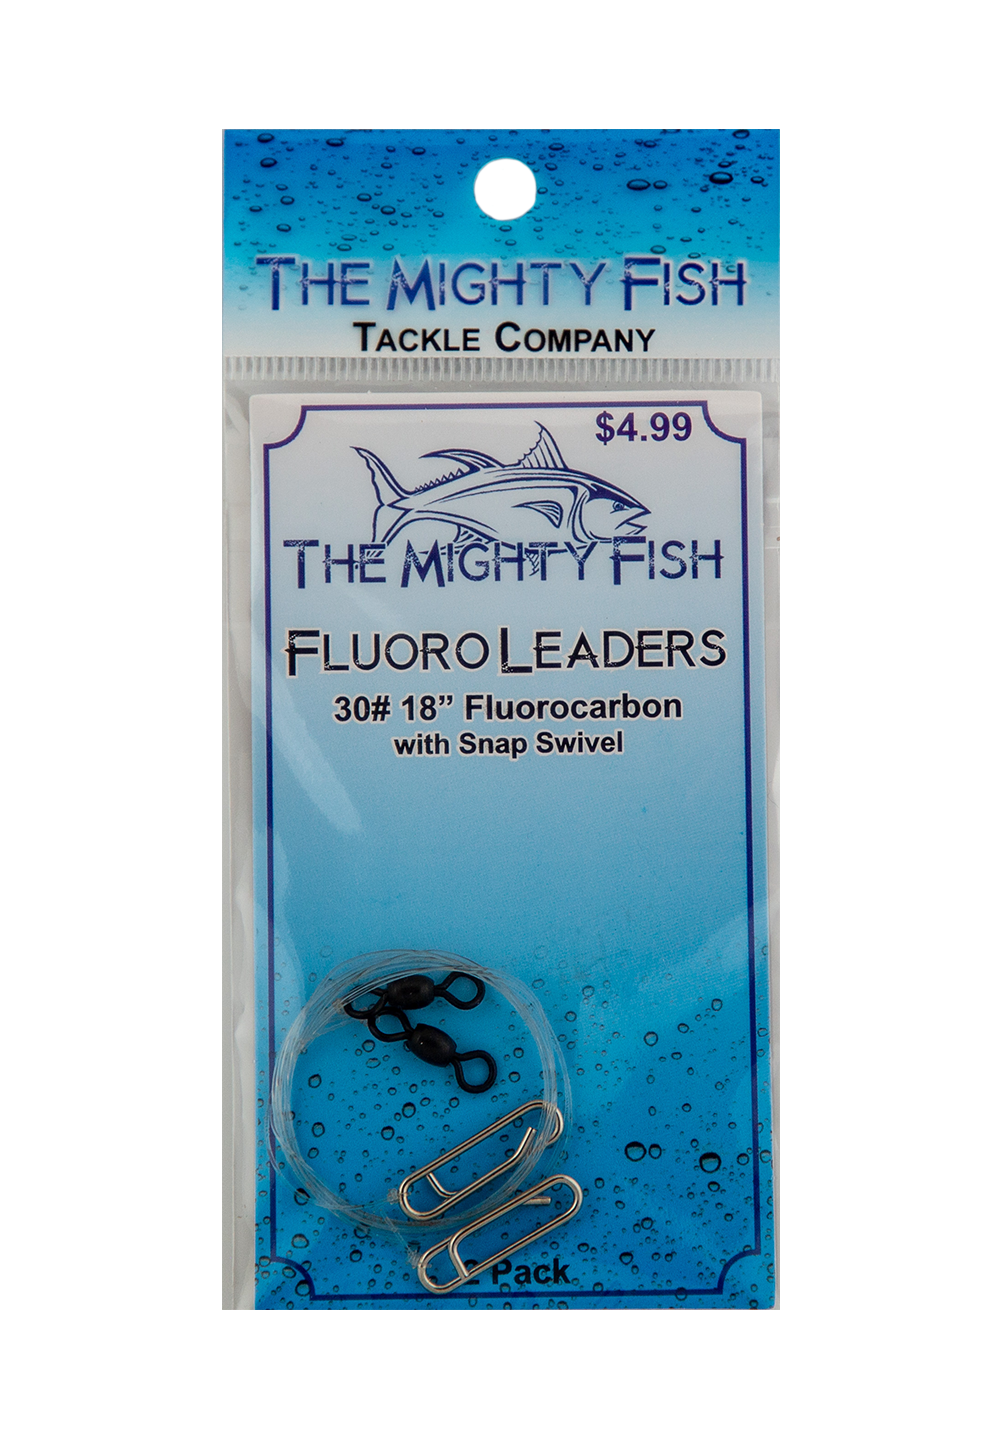 THE MIGHTY FISH TACKLE COMPANY SNELLED LEADER